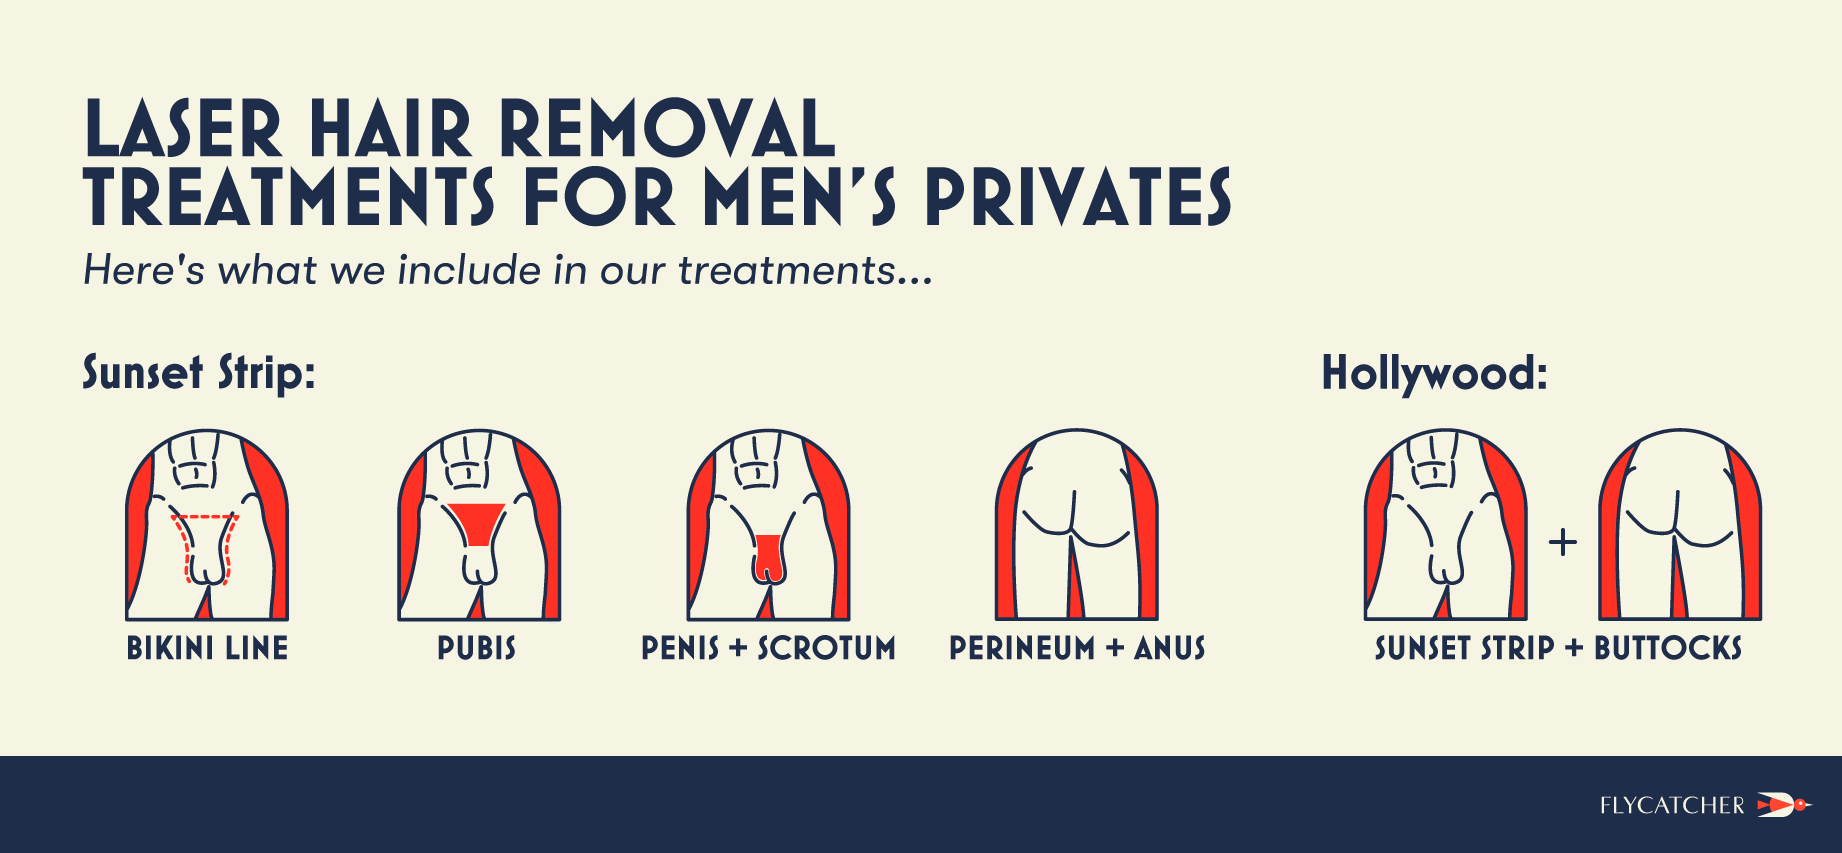 men's privates laser hair removal treatments